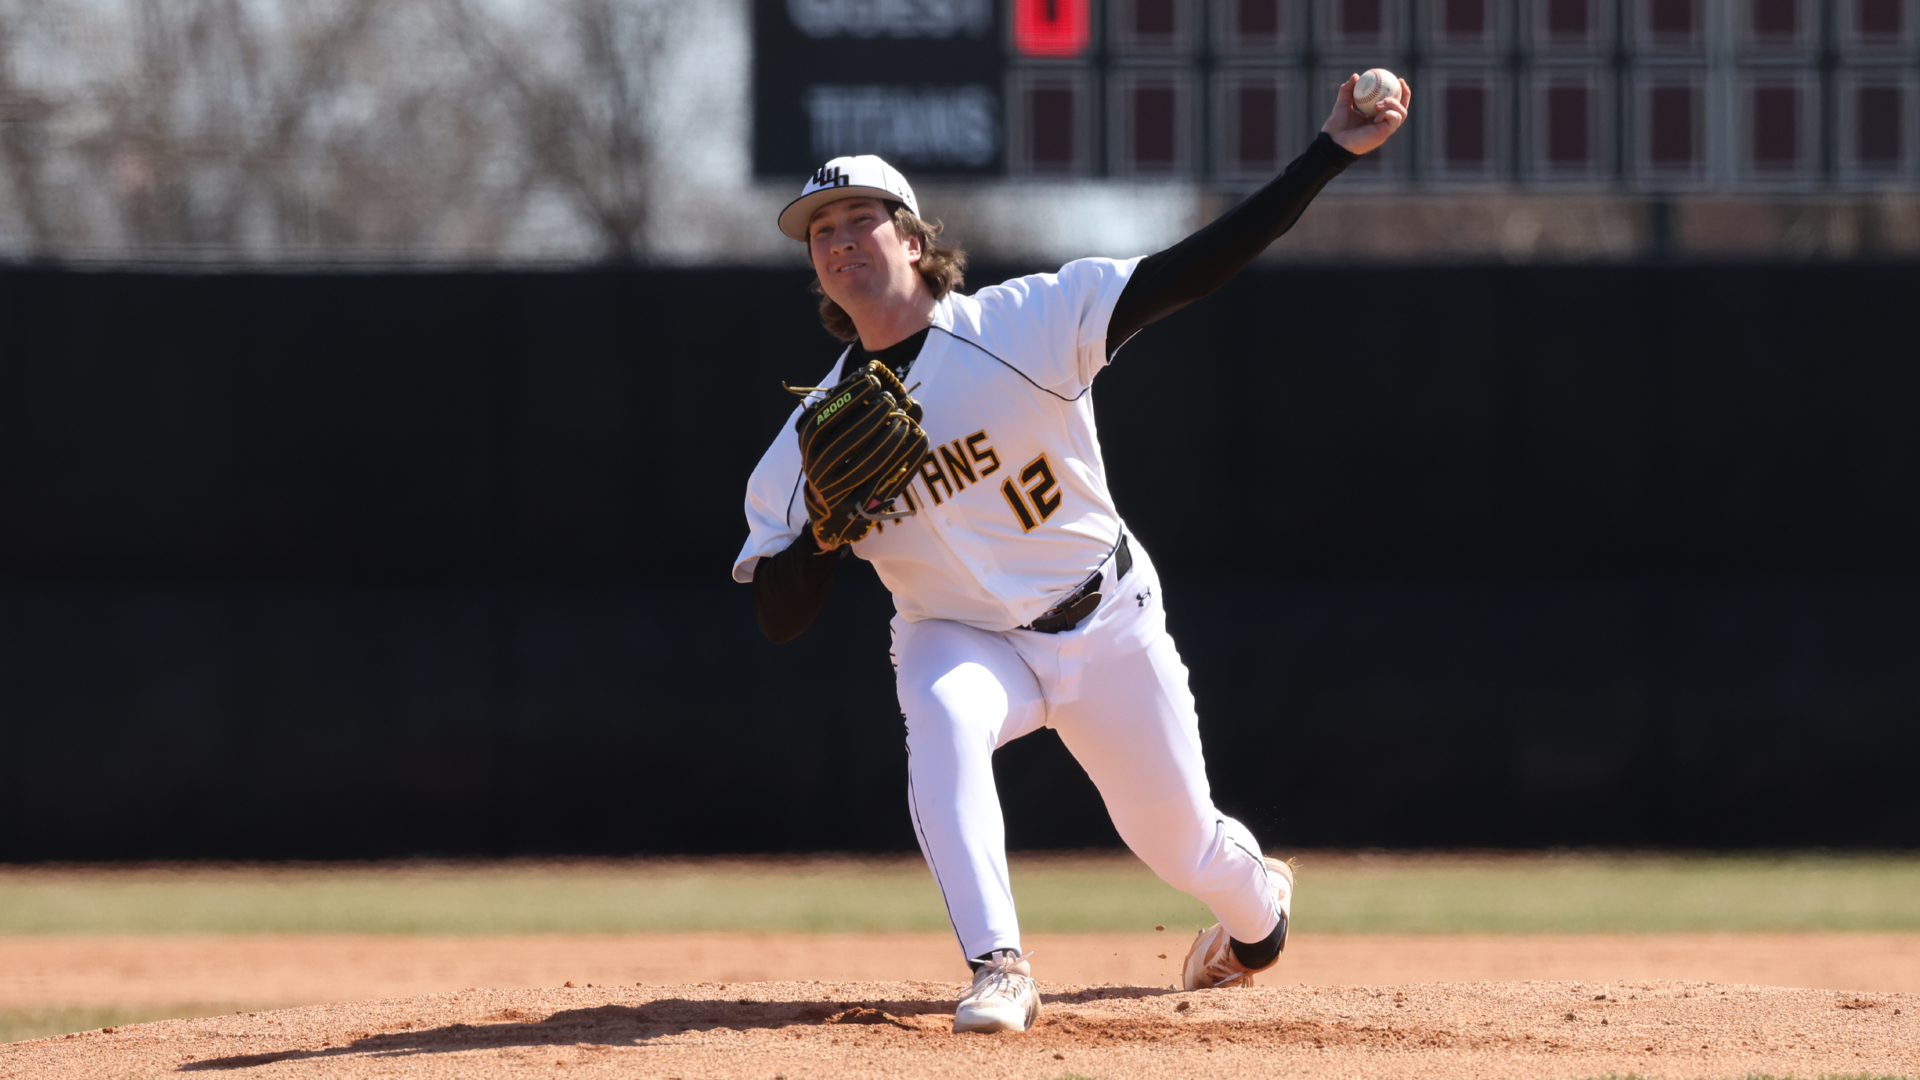 Connor Brinkman threw a five-strikeout shutout of the Blue Devils on Friday. Photo Credit: Steve Frommell, UW-Oshkosh Sports Information